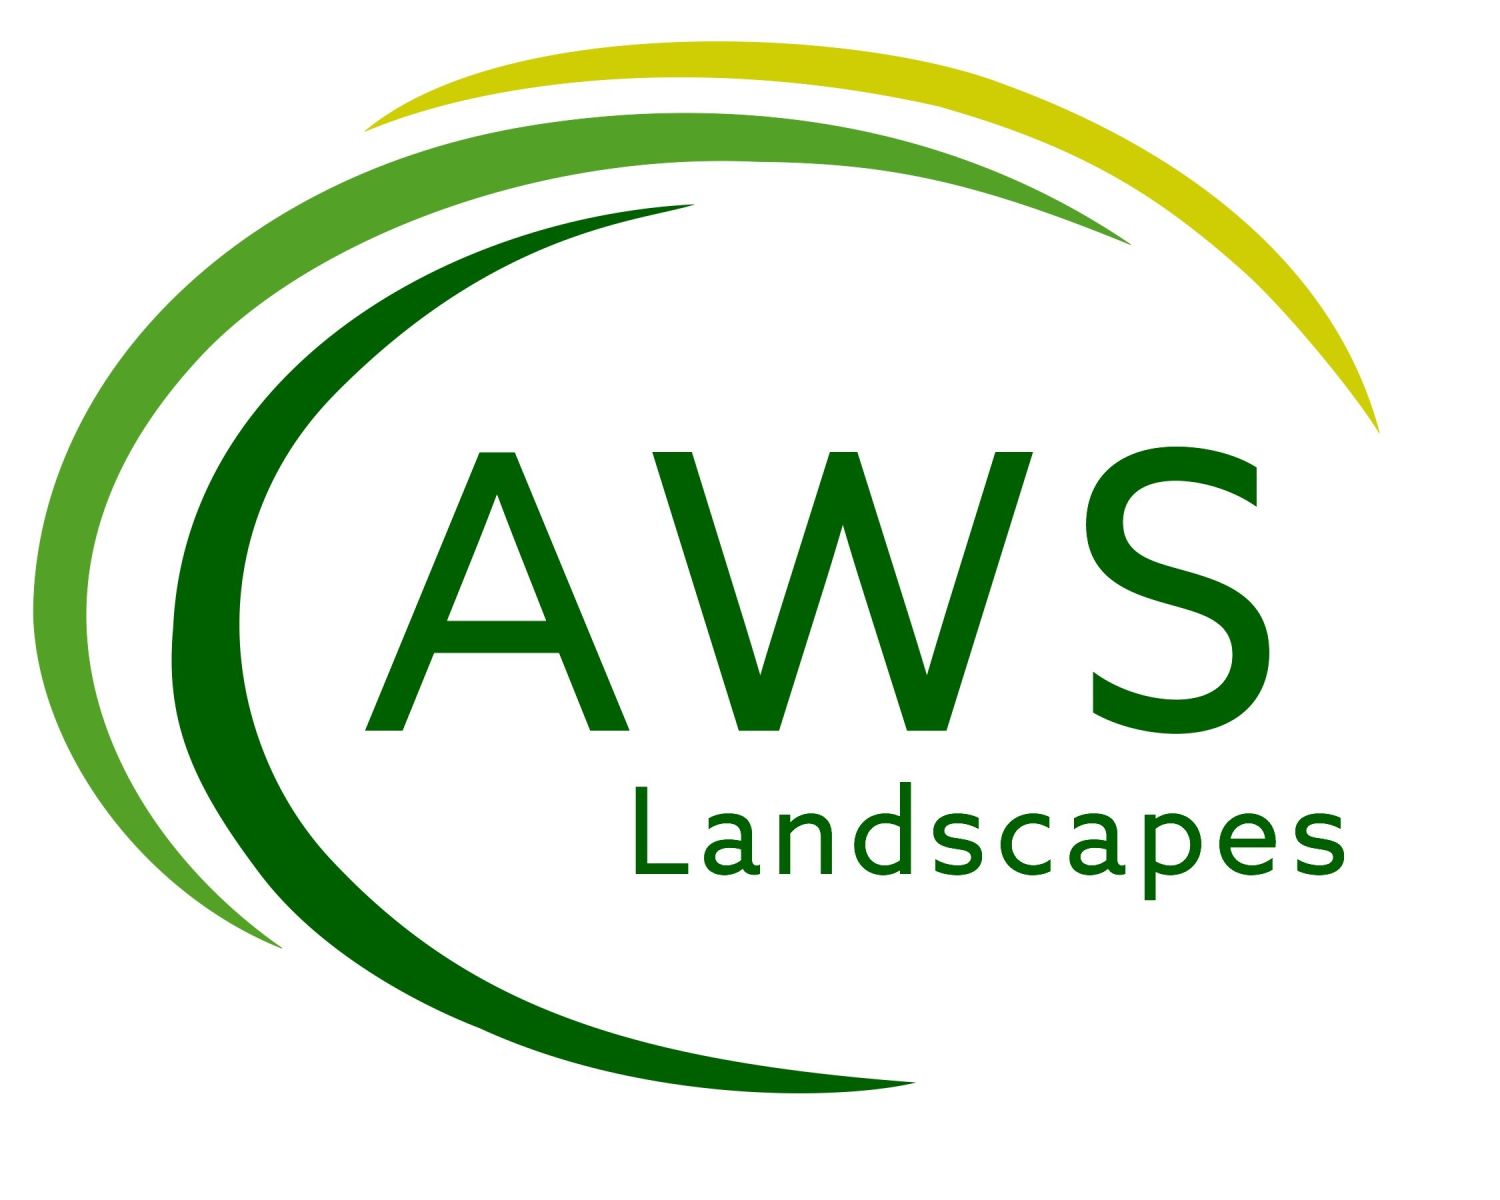 AWS landscapes working with railway sleepers in South Yorkshire